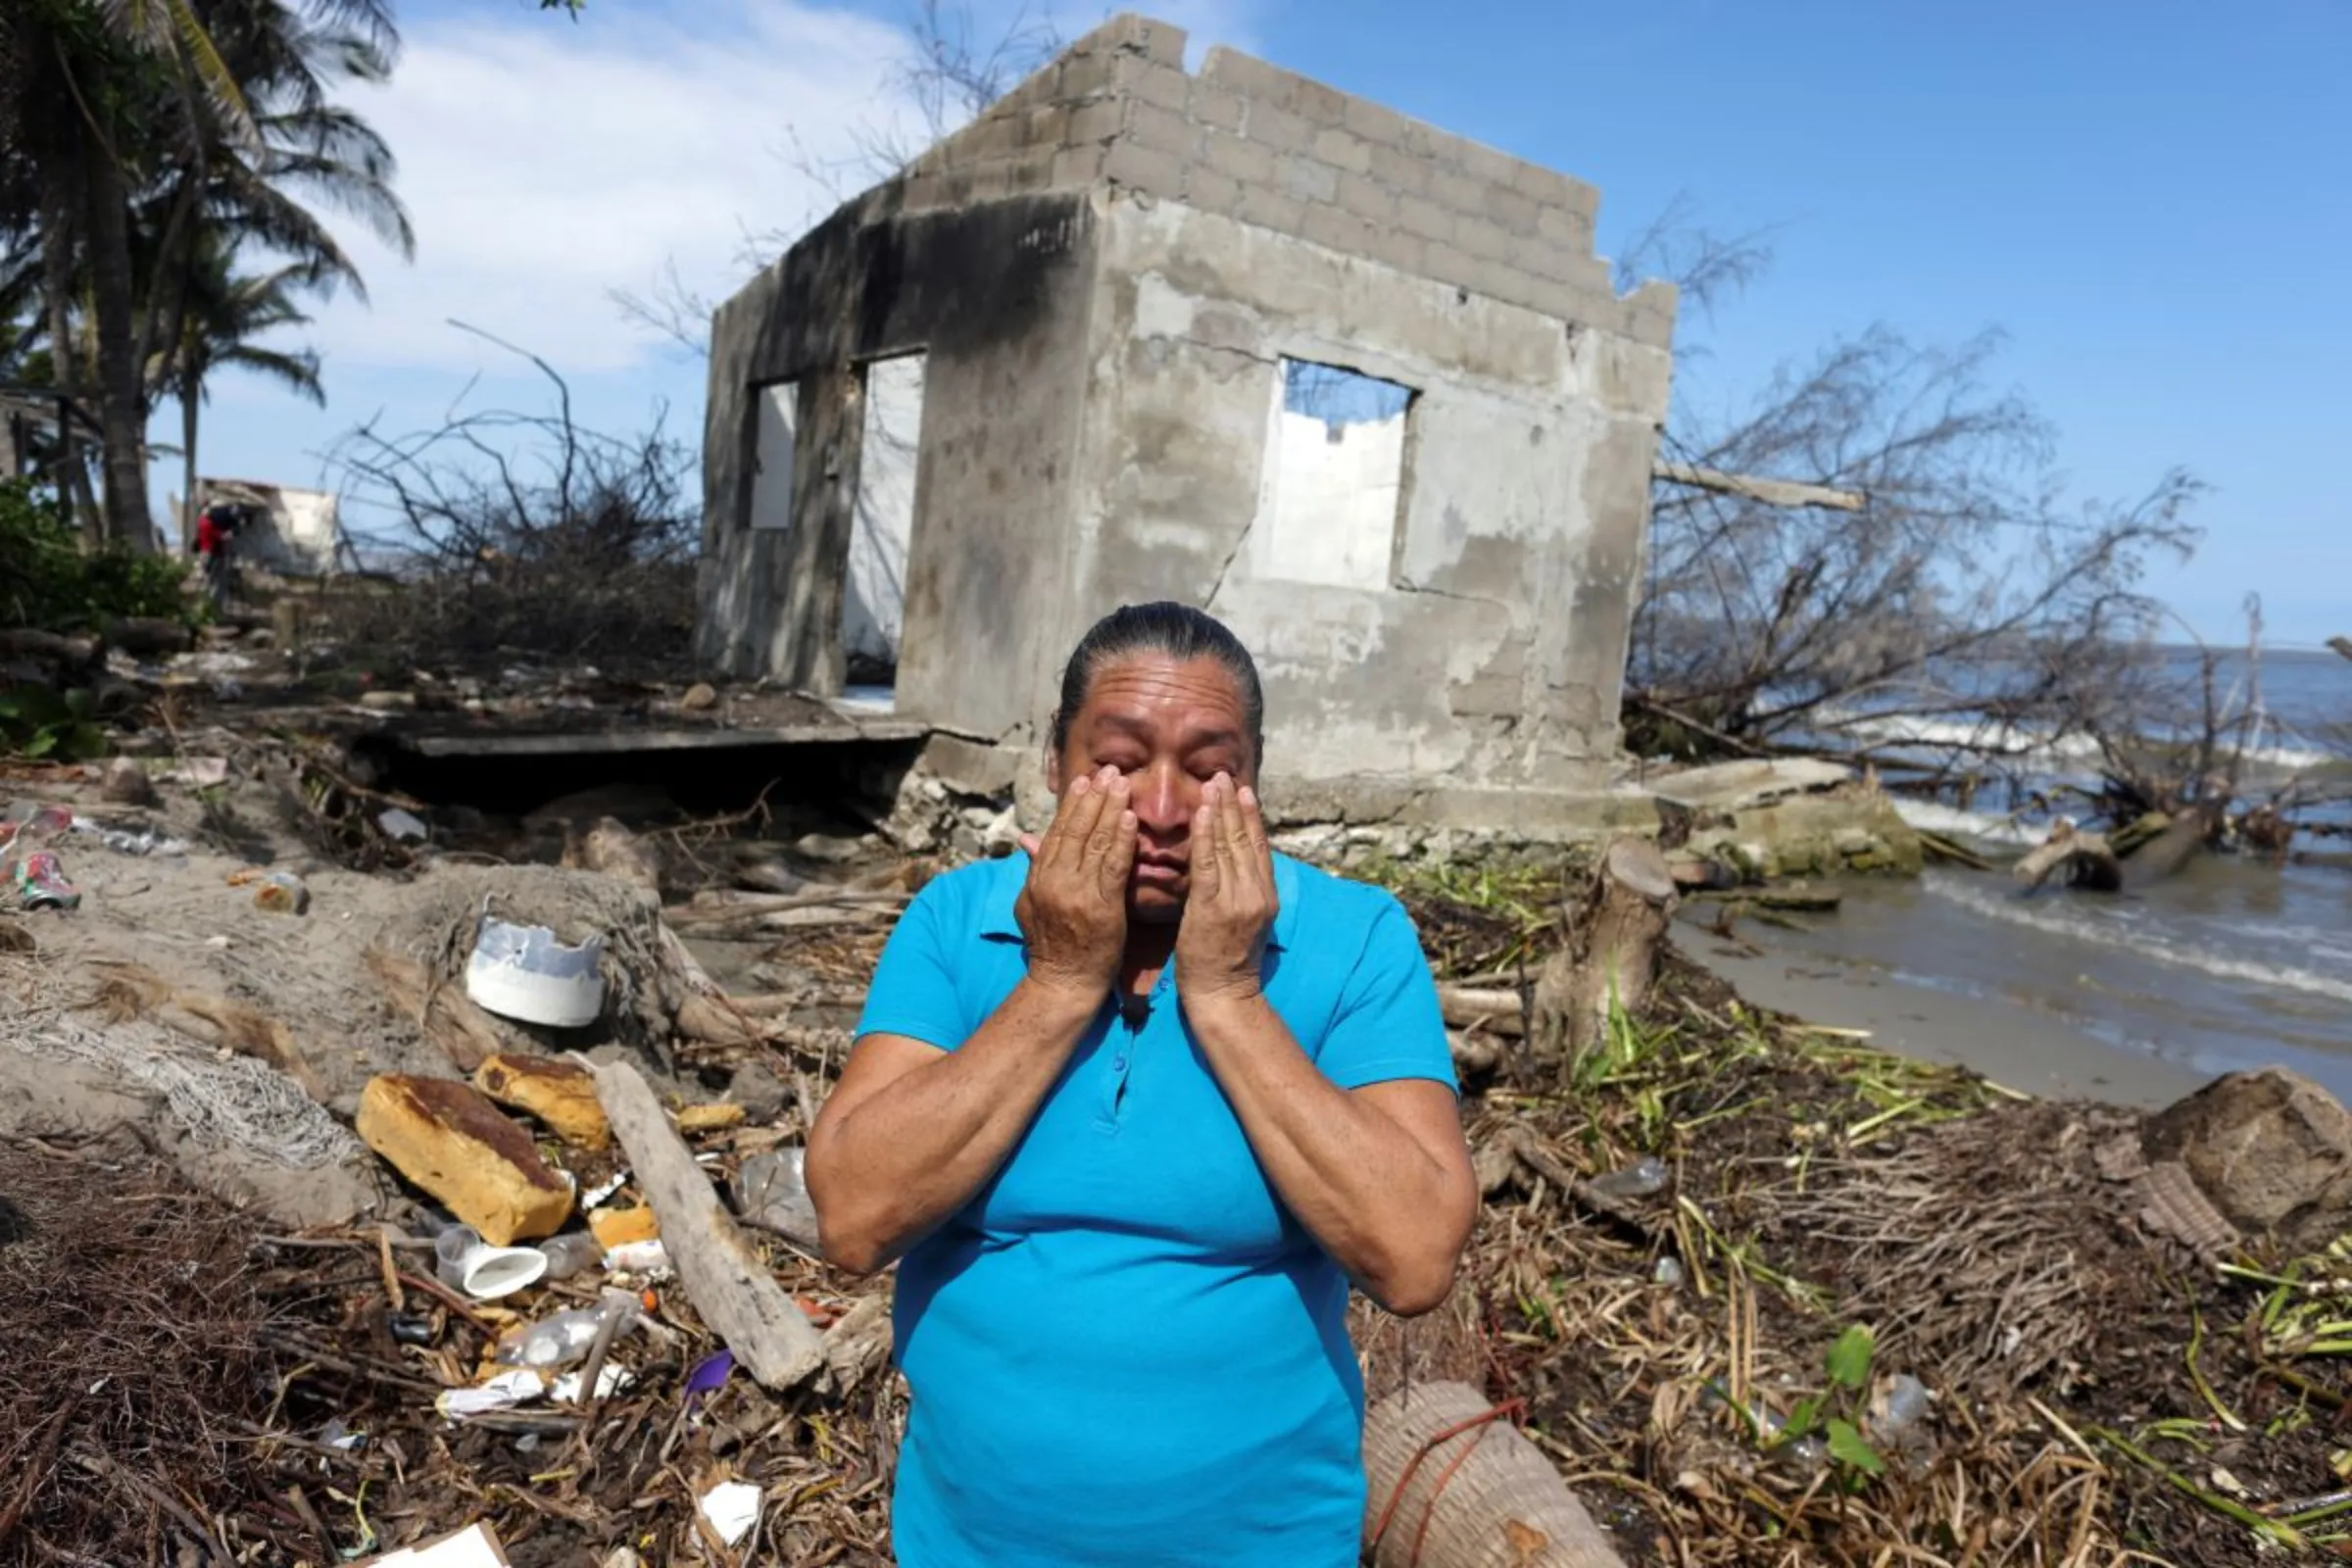 A resident of El Bosque cries in front of what is left of her house as rising sea levels are destroying homes built on the shoreline and forcing villagers to relocate, in El Bosque, Mexico November 7, 2022. REUTERS/Gustavo Graf